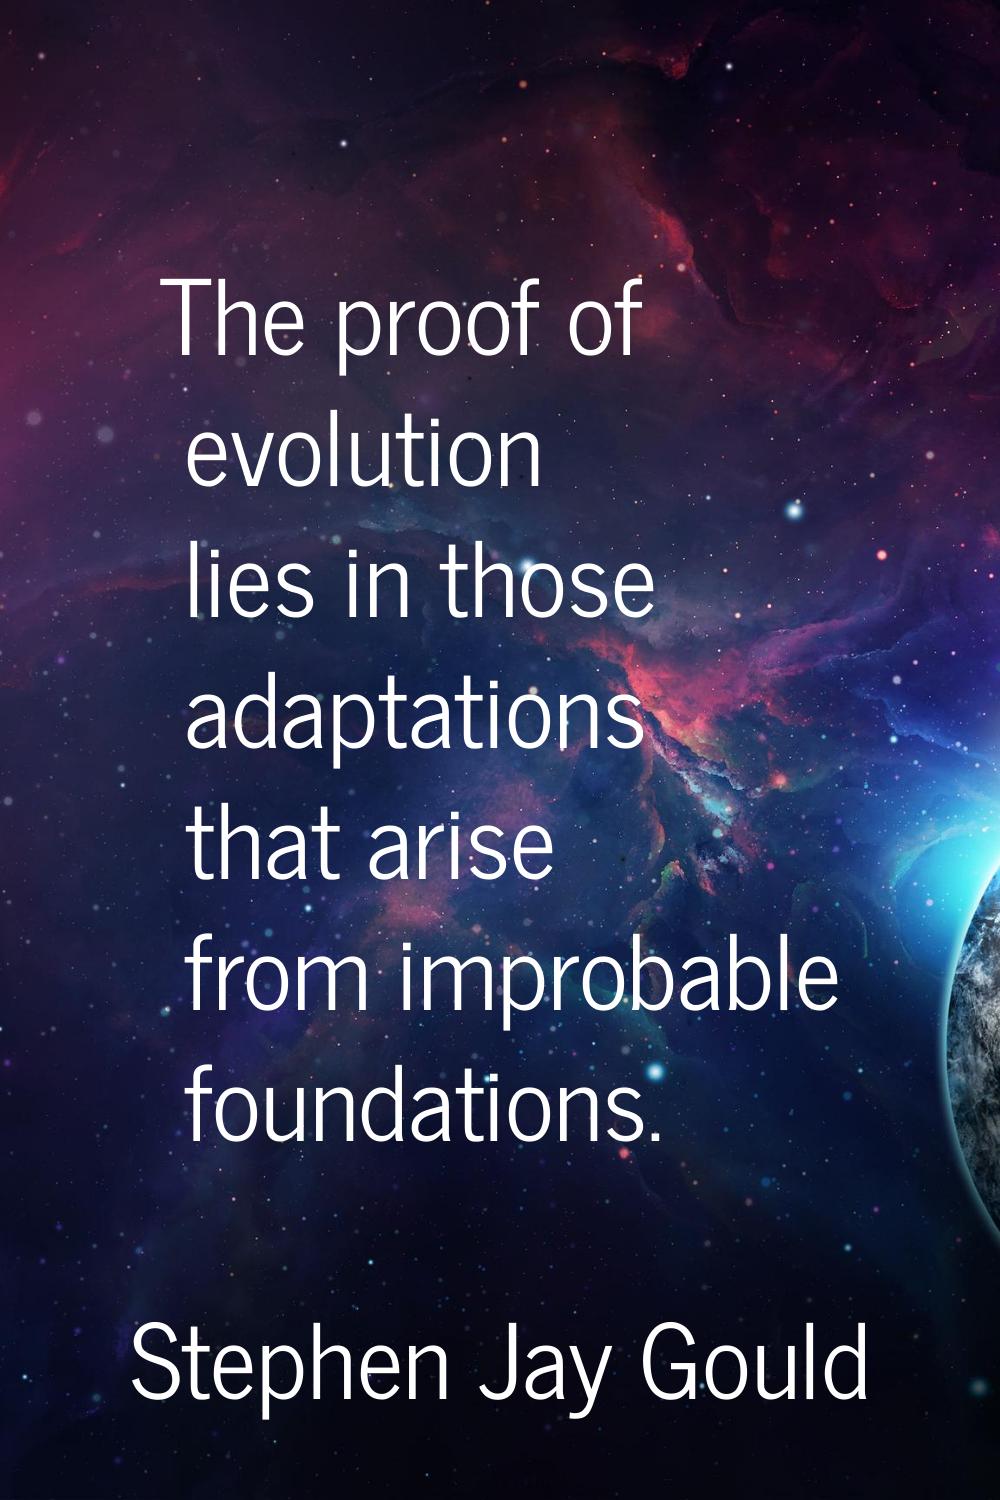 The proof of evolution lies in those adaptations that arise from improbable foundations.